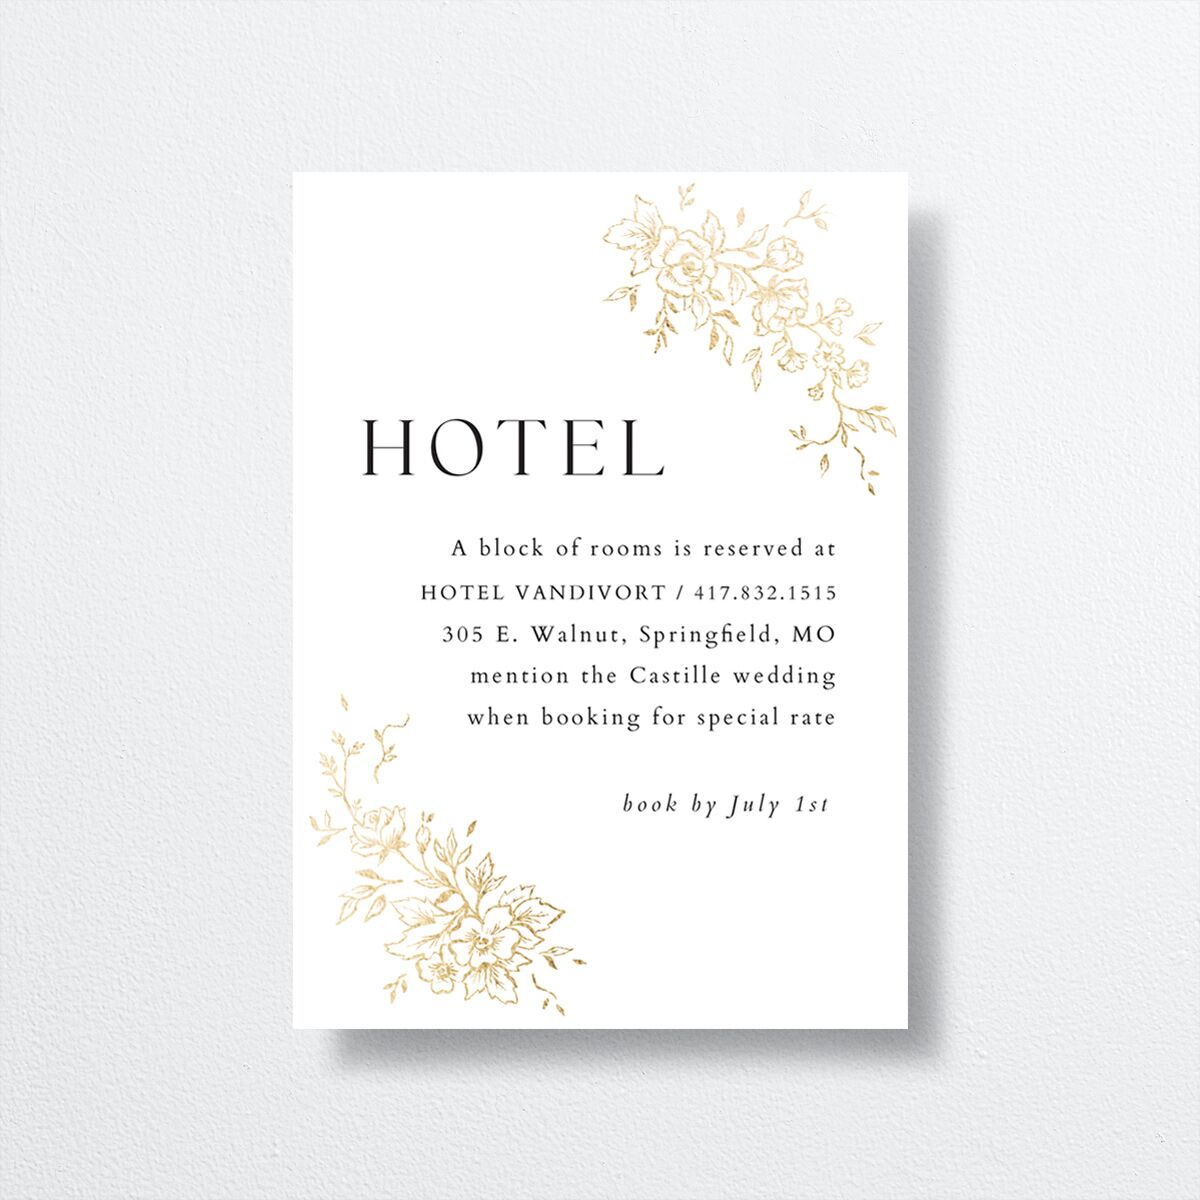 Delicacy Wedding Enclosure Cards by Vera Wang front in White